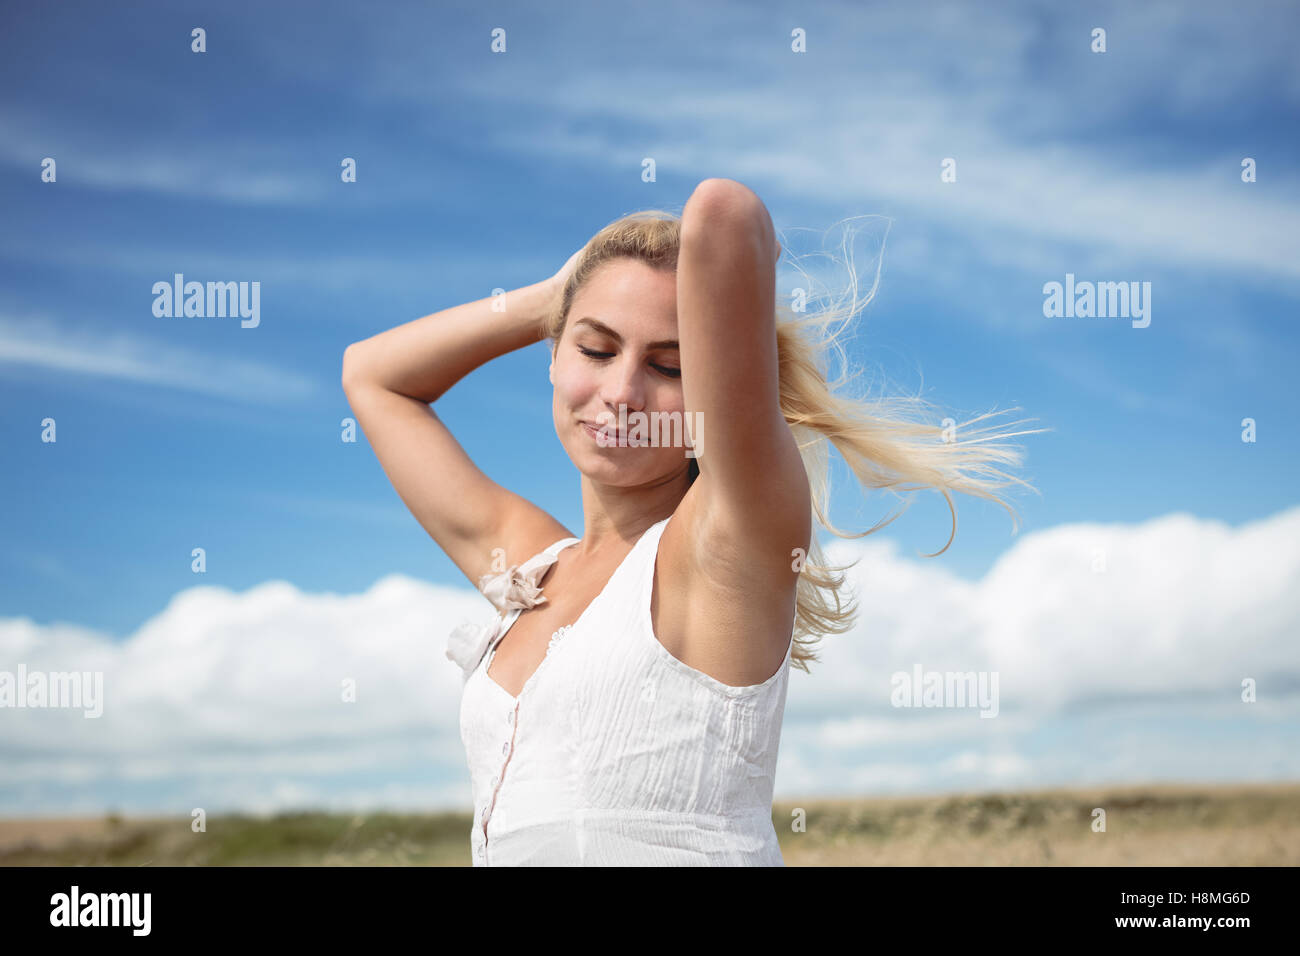 Blonde woman standing in field with hand in hair Stock Photo